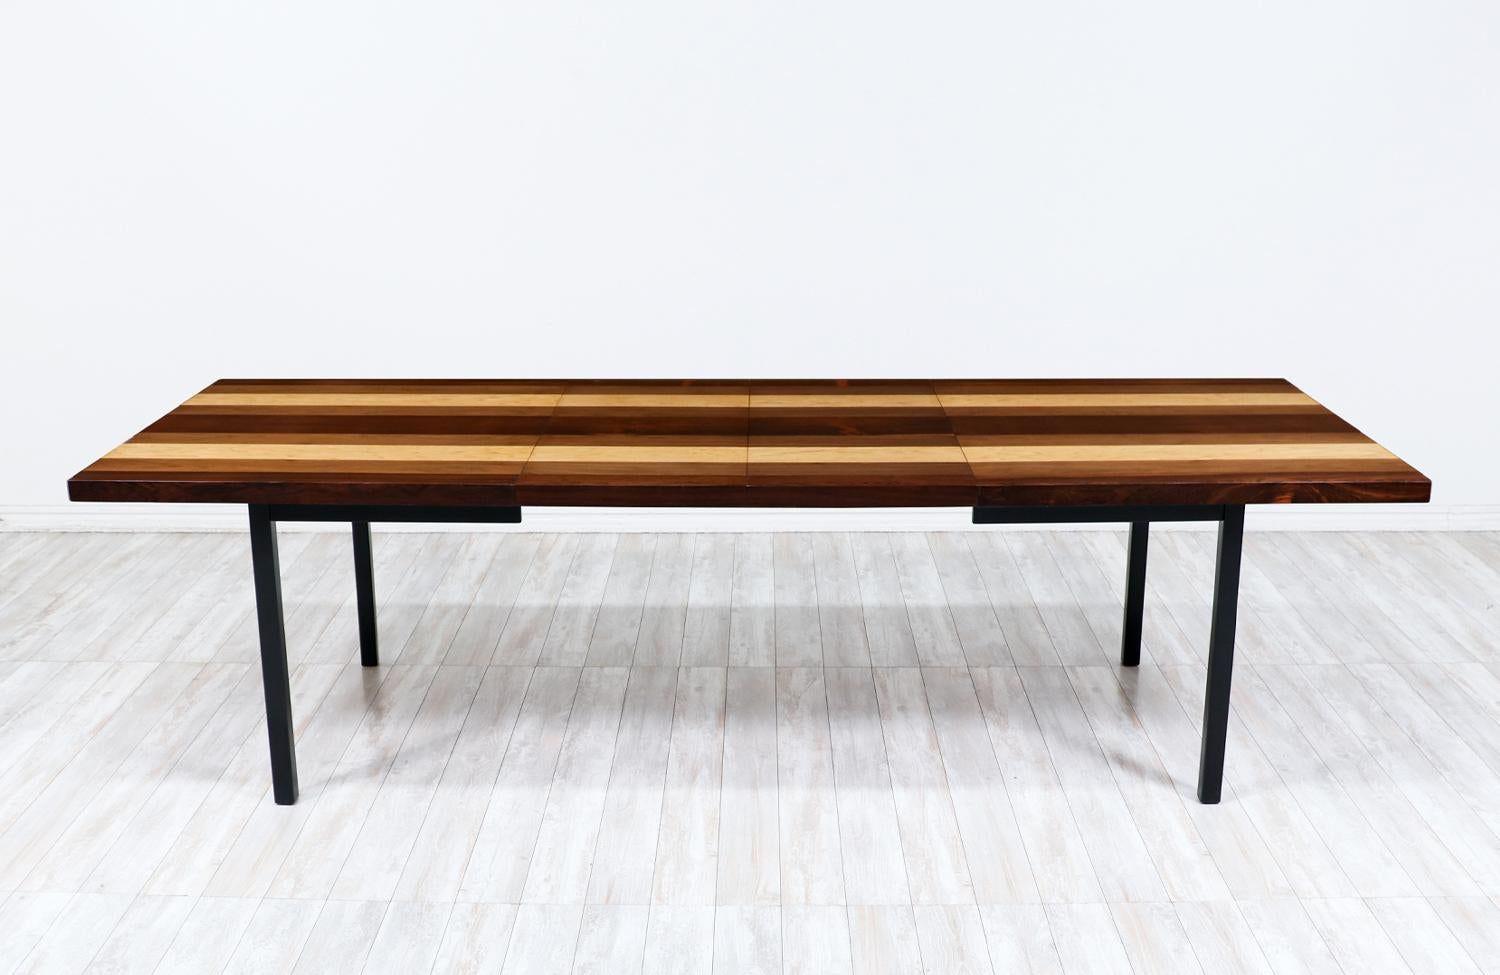 Milo Baughman Multi-Wood Extendable Dining Table for Directional In Excellent Condition For Sale In Los Angeles, CA